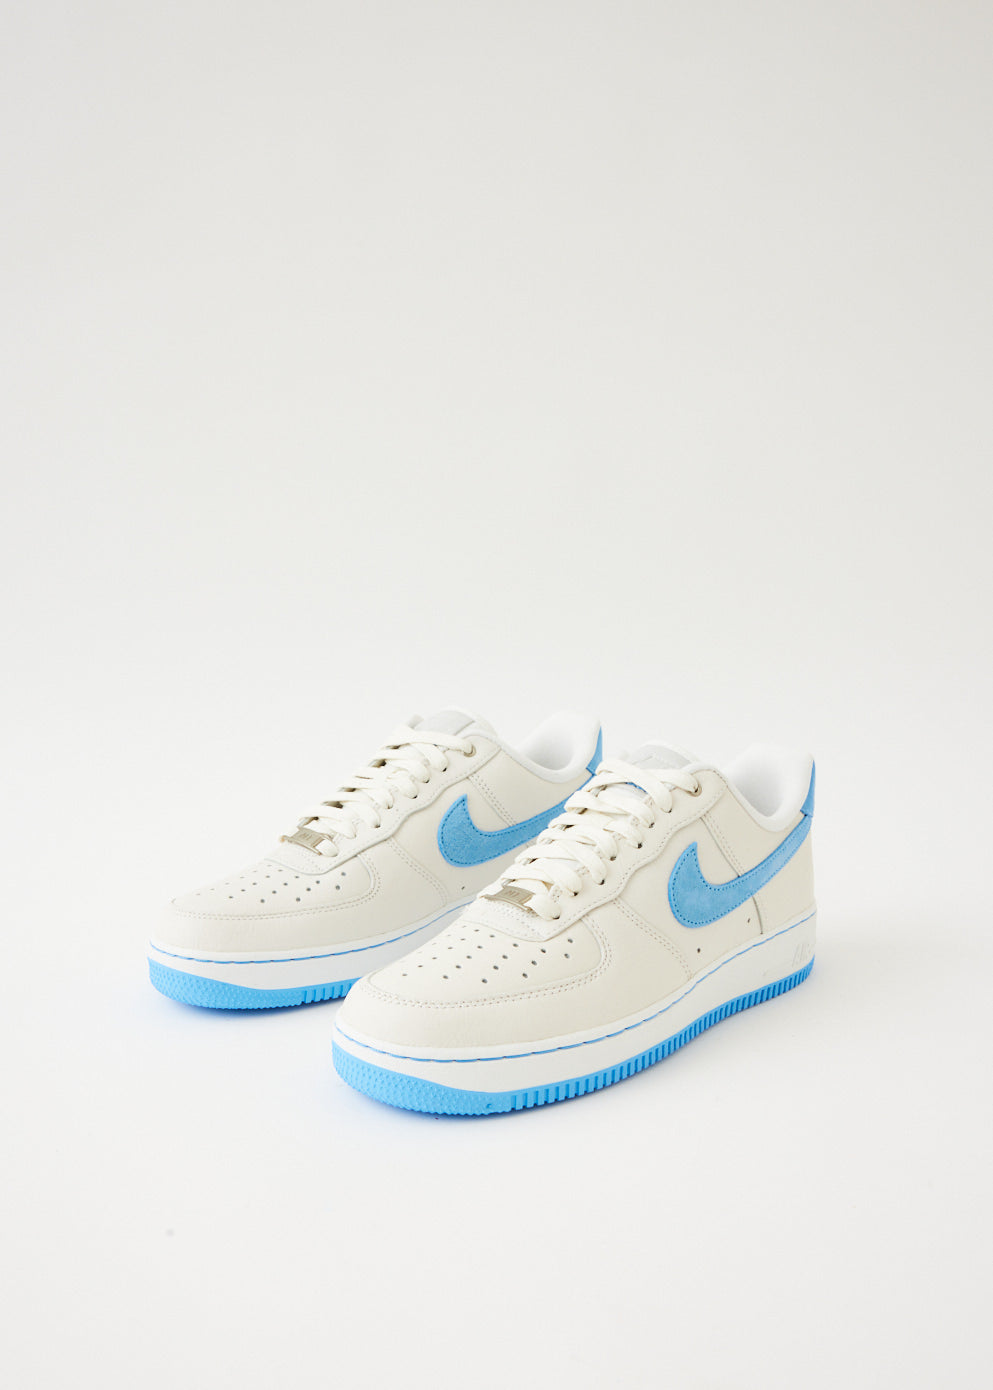 Nike Air Force 1 '07 LX Γυναικεία Sneakers Summit White / Hyper Royal  Picante Red DR0148-100